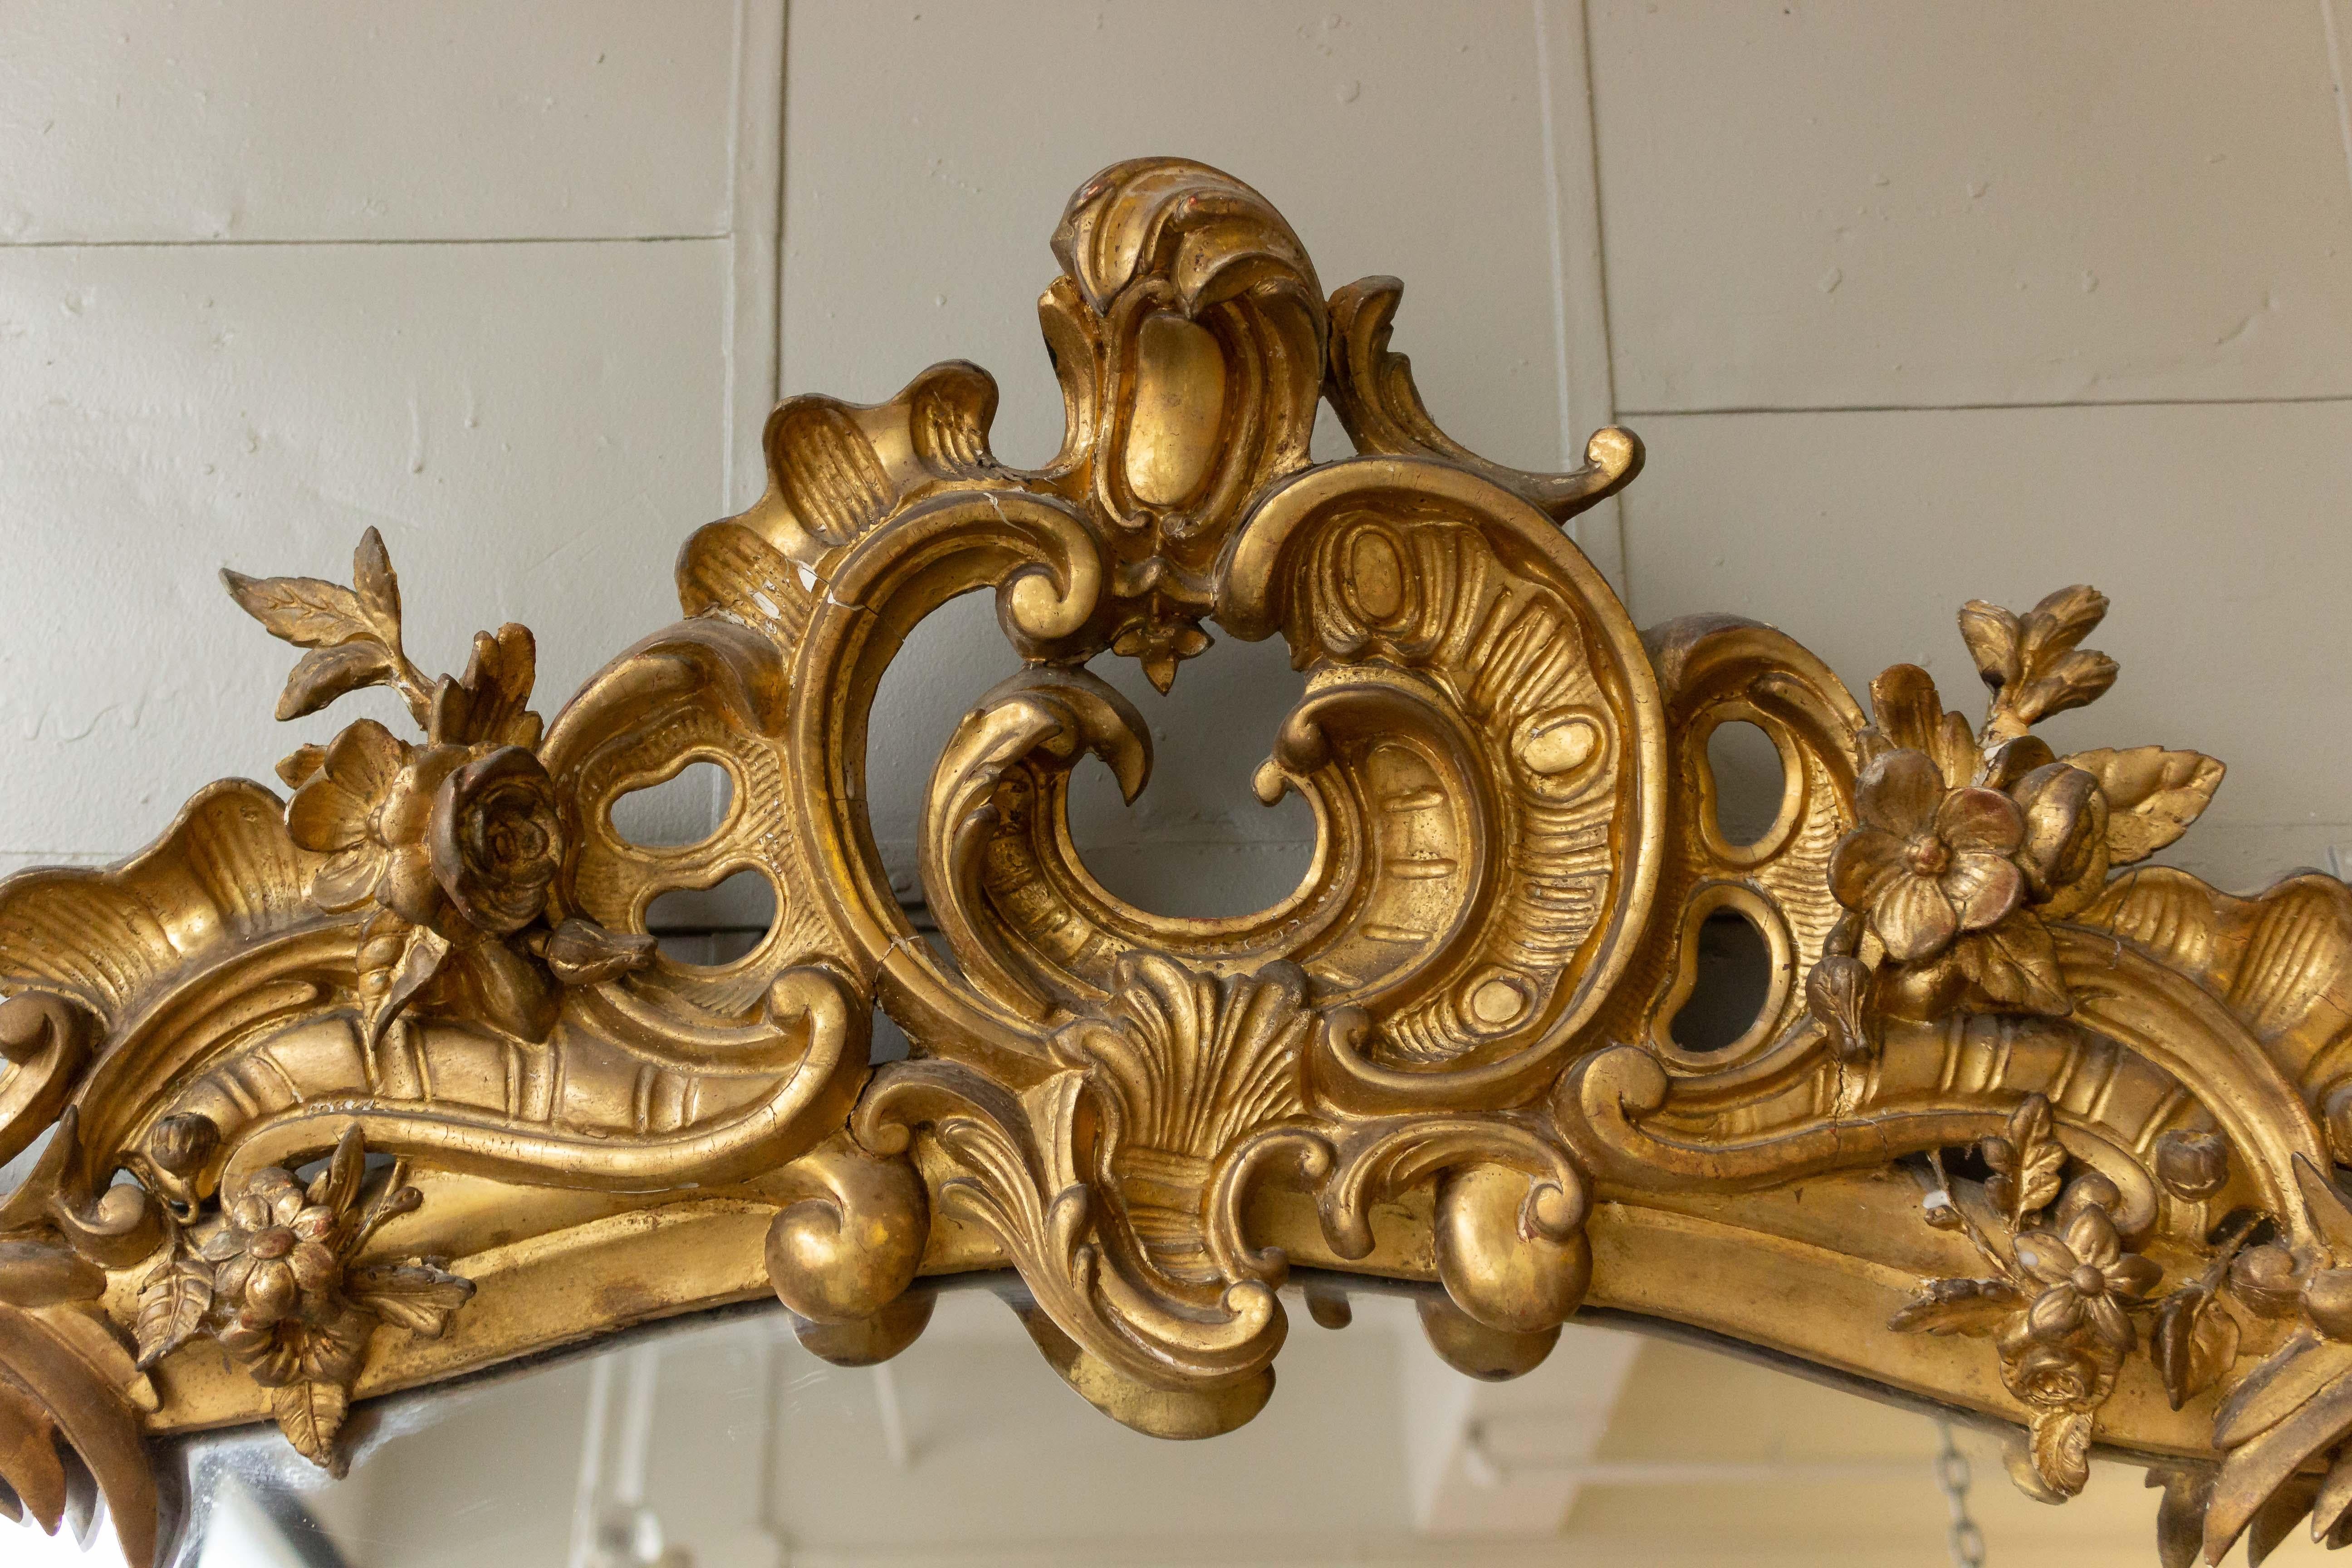 Very large and ornate gilt wood and plaster mirror in the Rococo baroque style with original mercury glass. The mirror is on good condition with minor losses to the frame. French mid-19th century.